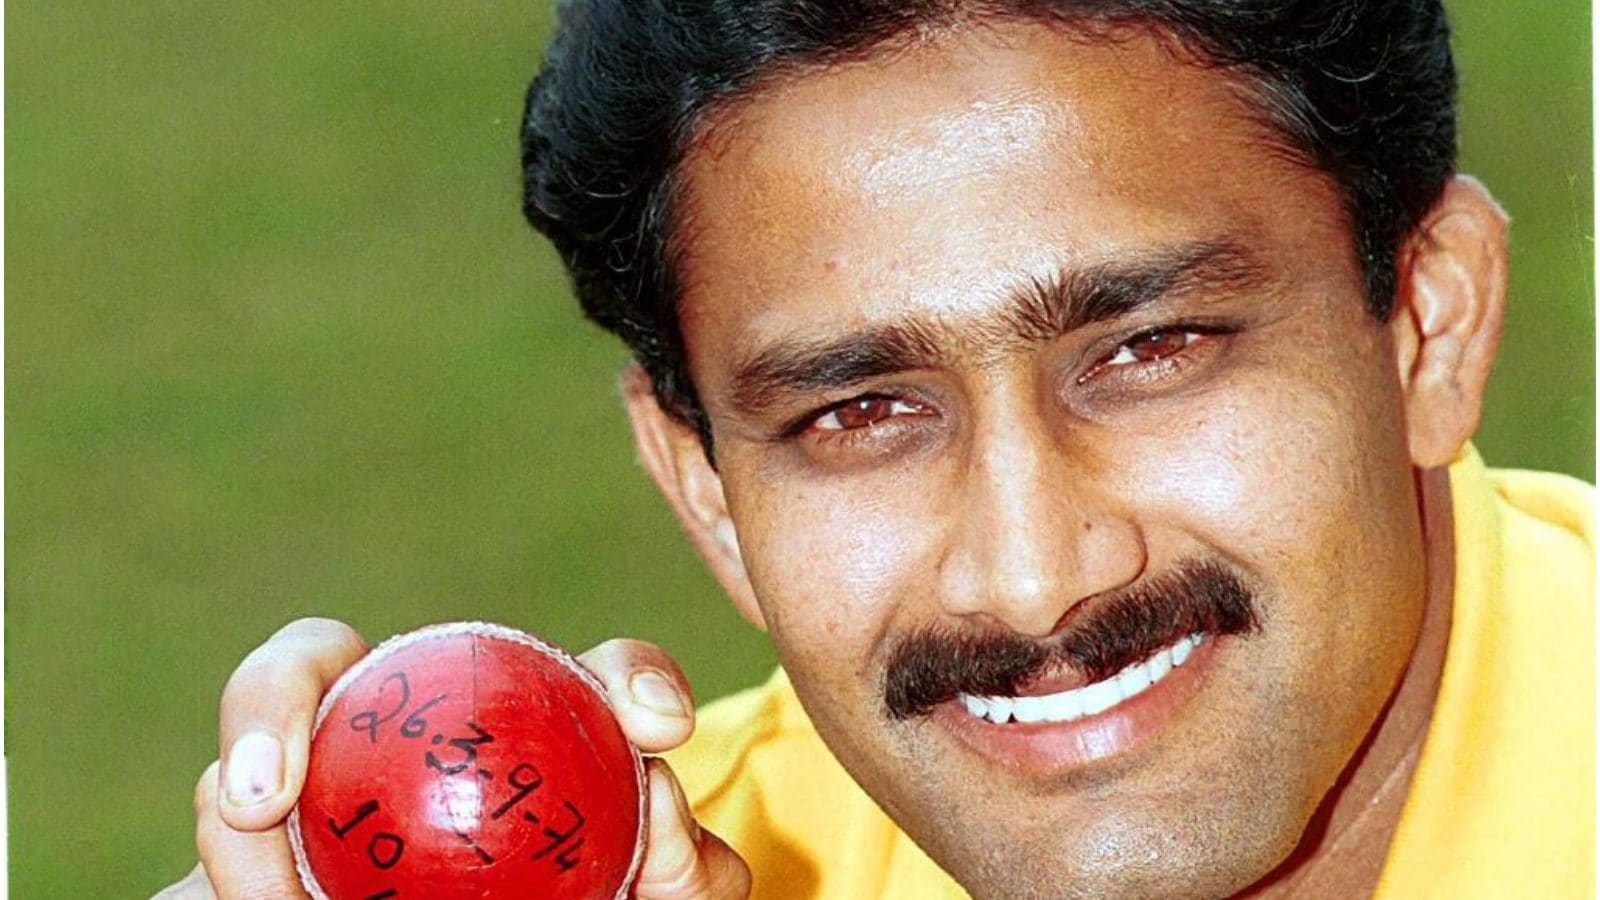 Top 20 famous cricketers in India | KreedOn 